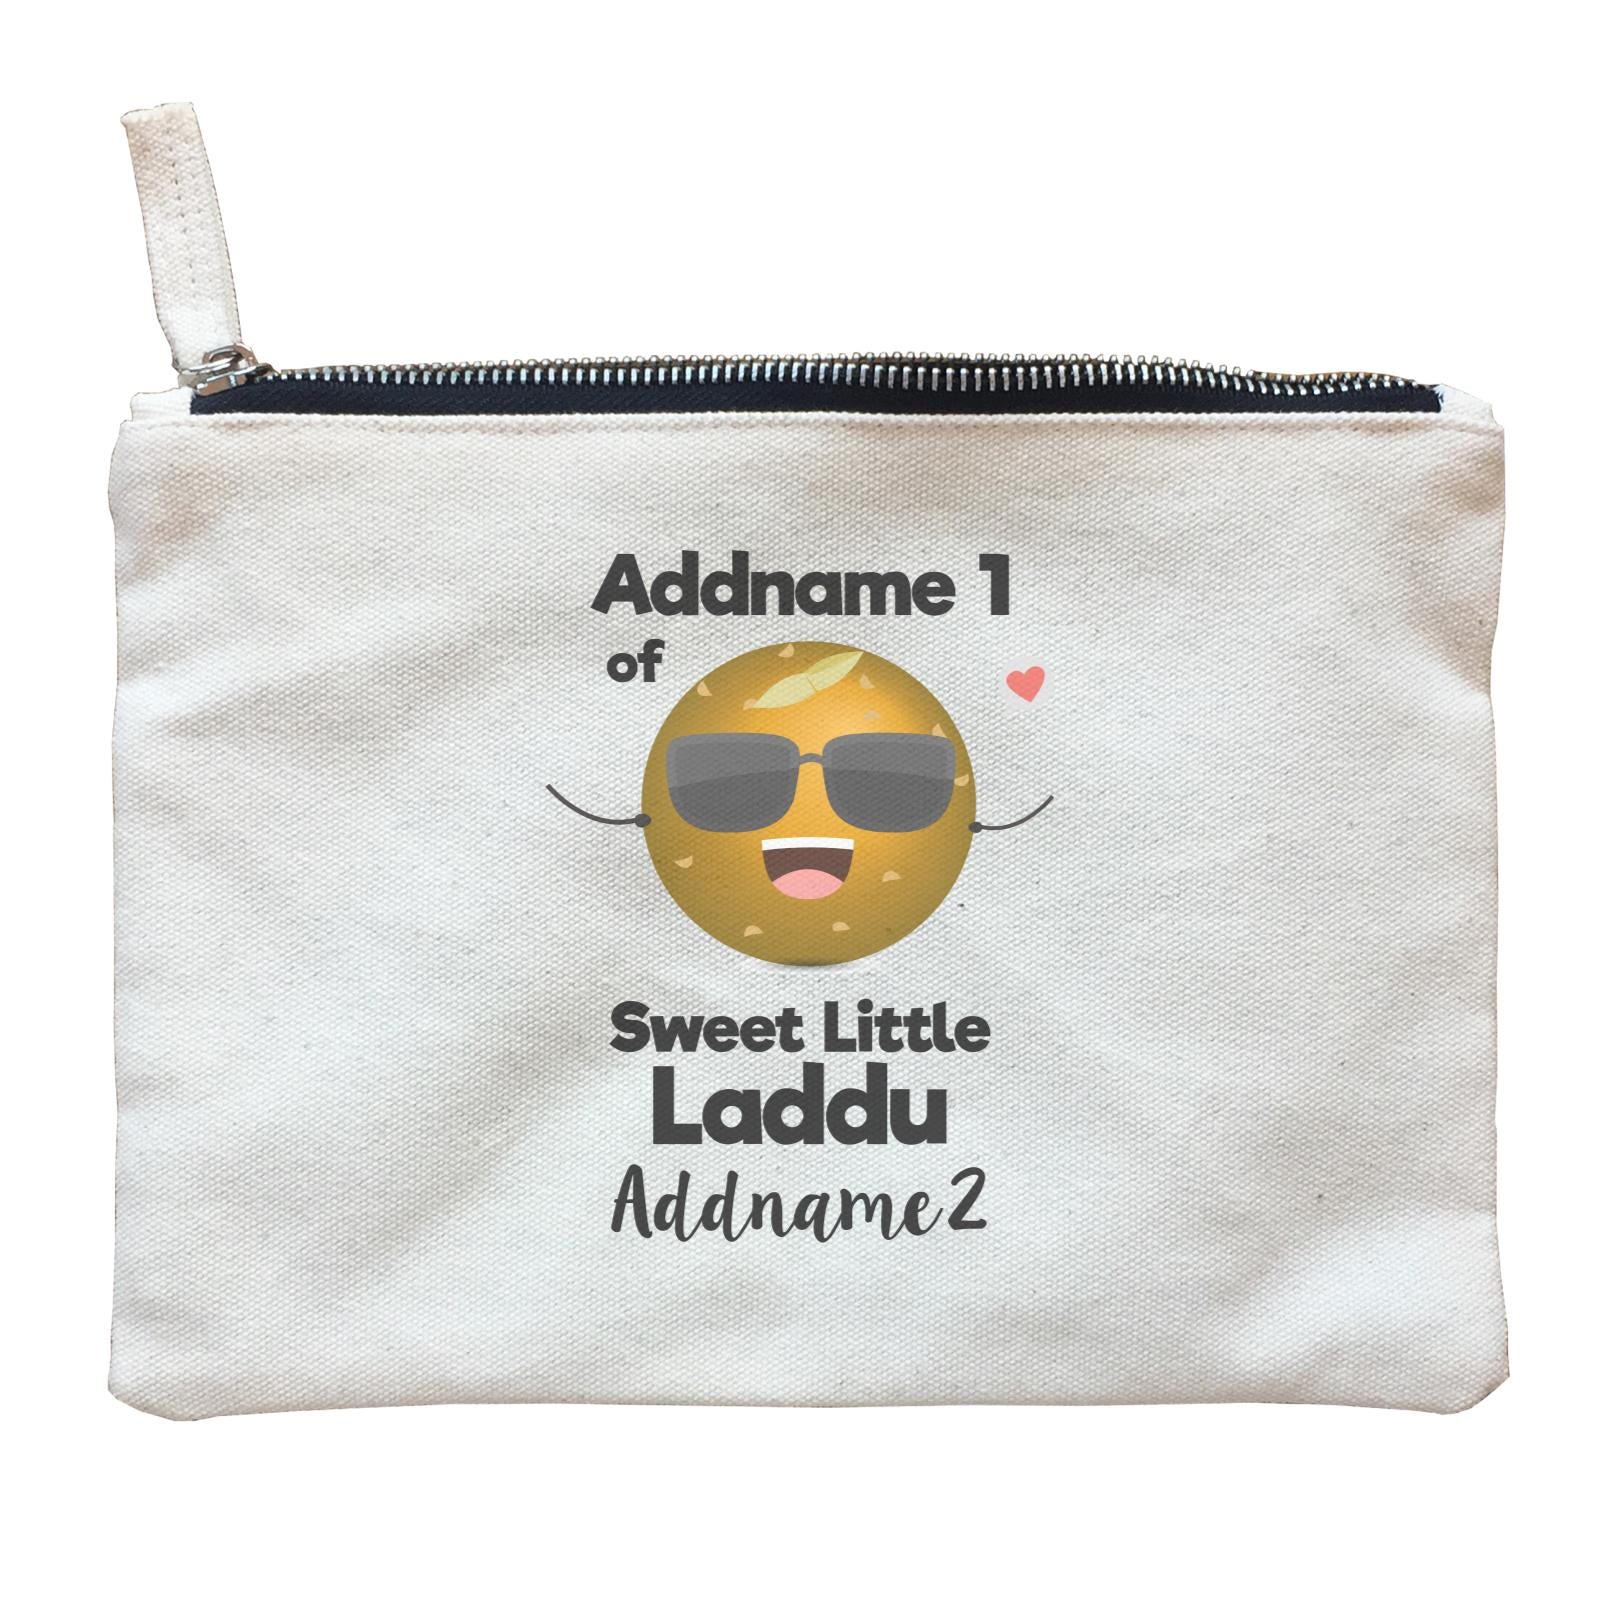 Addname 1 of Sweet Little Laddu Addname 2 Zipper Pouch